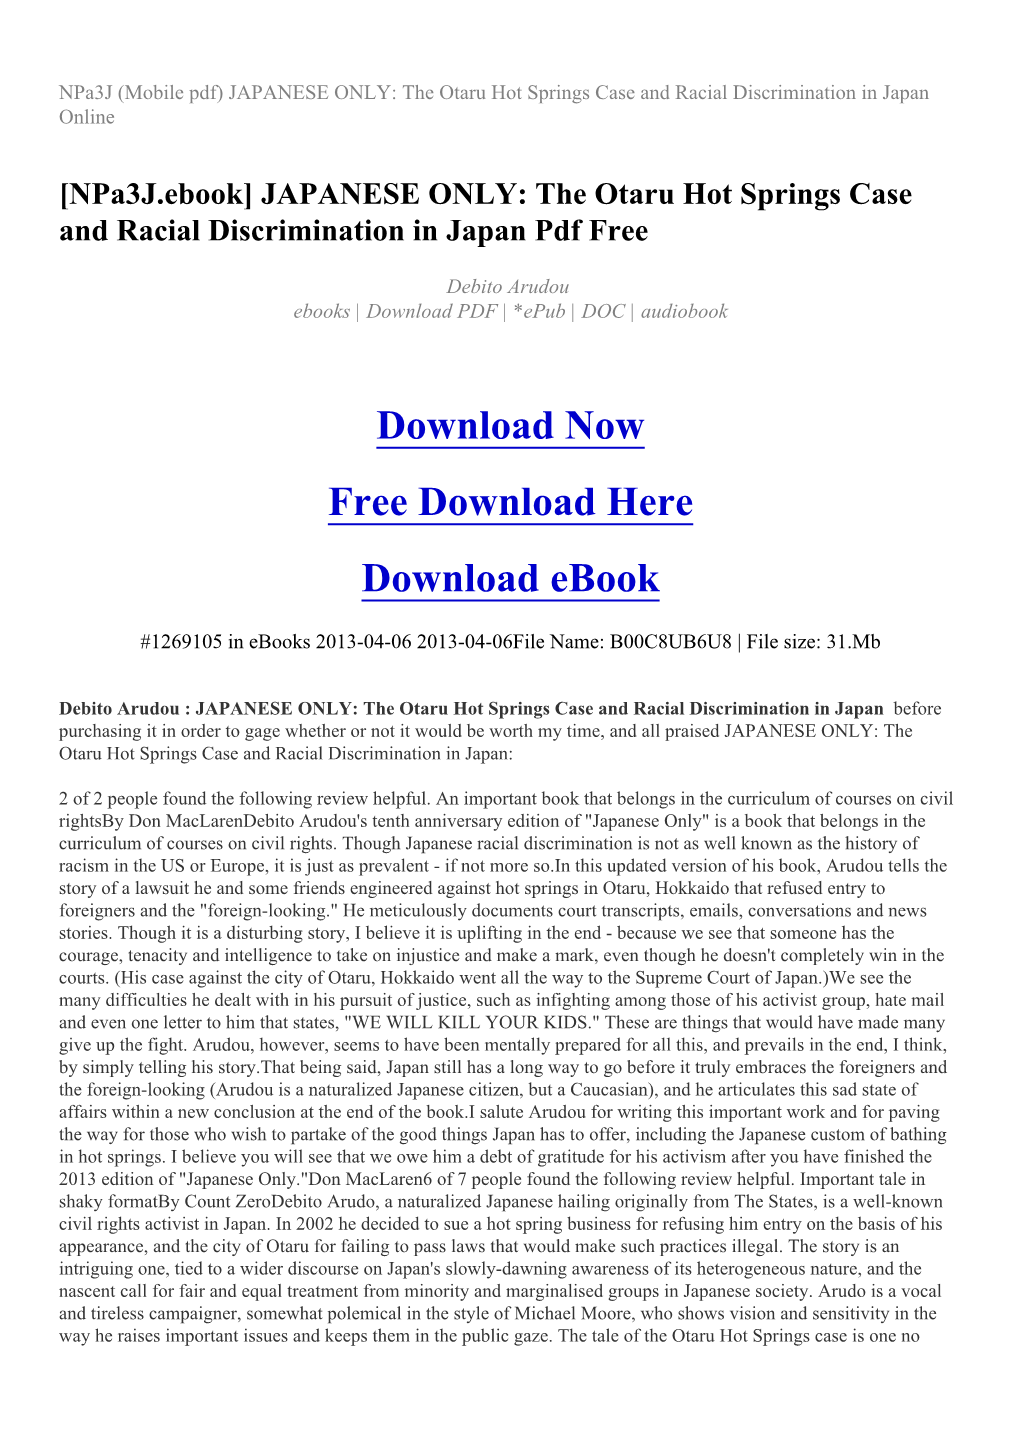 The Otaru Hot Springs Case and Racial Discrimination in Japan Online